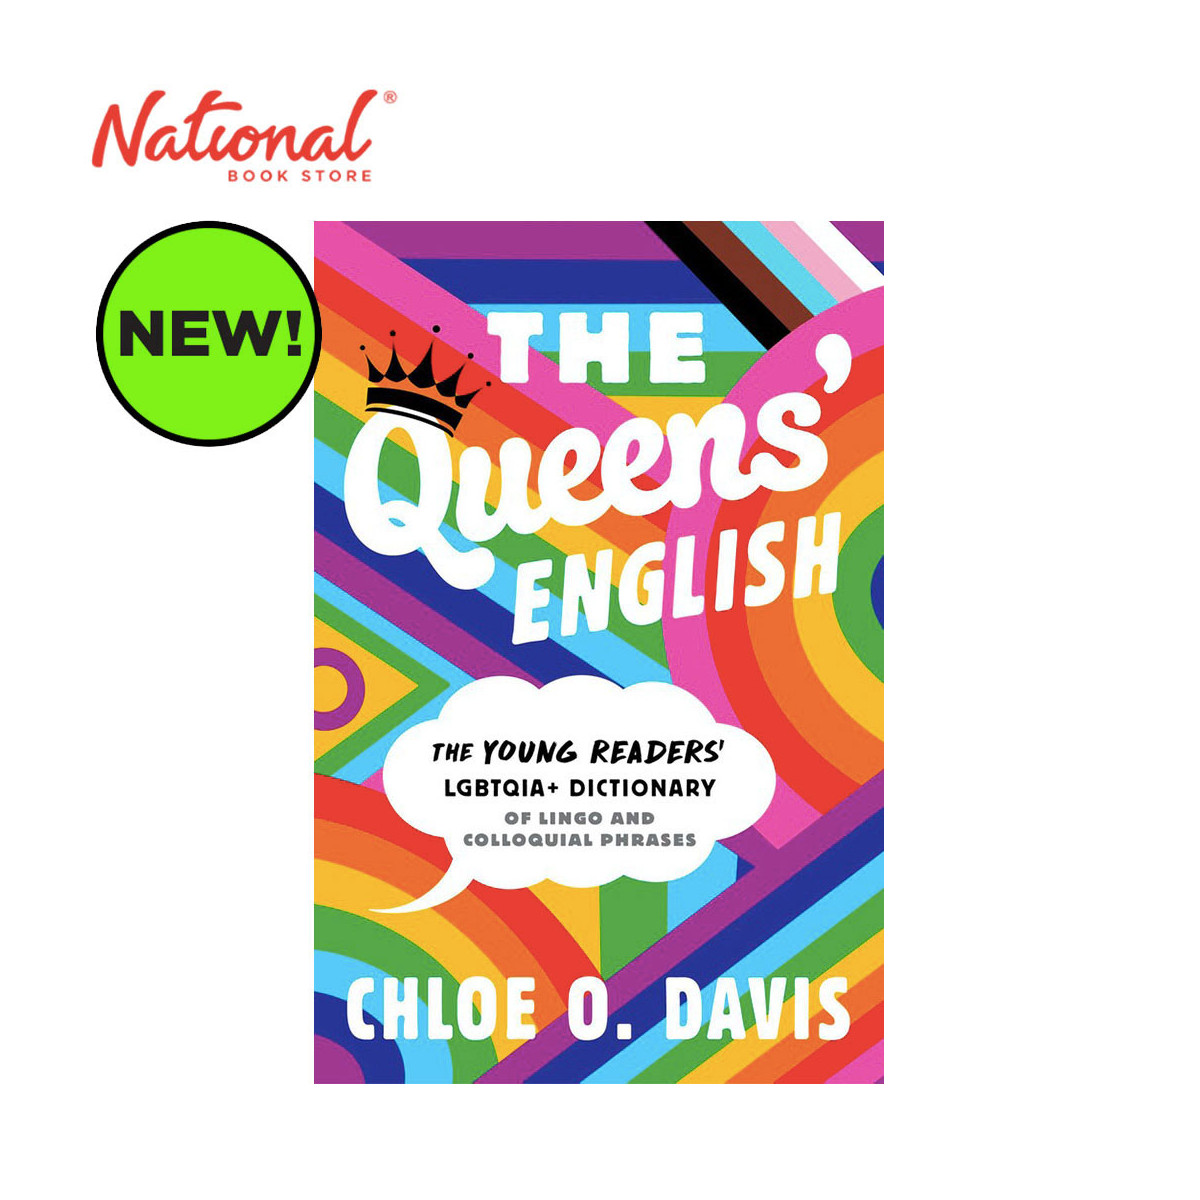 *PRE-ORDER* The Queen's' English by Chloe O. Davis - Hardcover - Children's Fiction